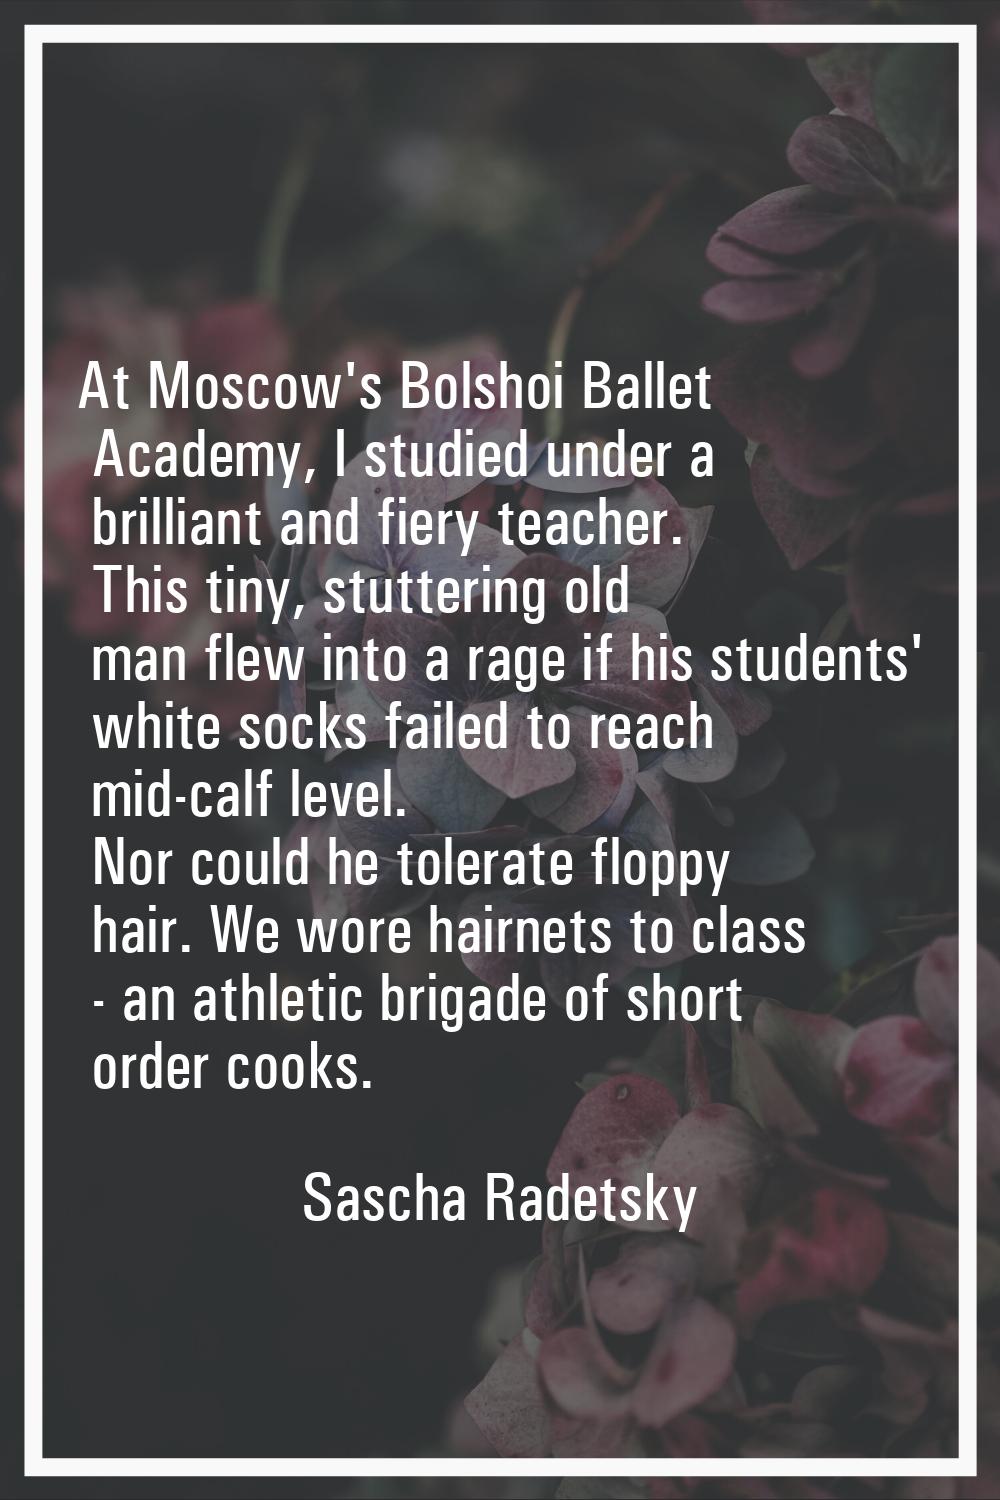 At Moscow's Bolshoi Ballet Academy, I studied under a brilliant and fiery teacher. This tiny, stutt